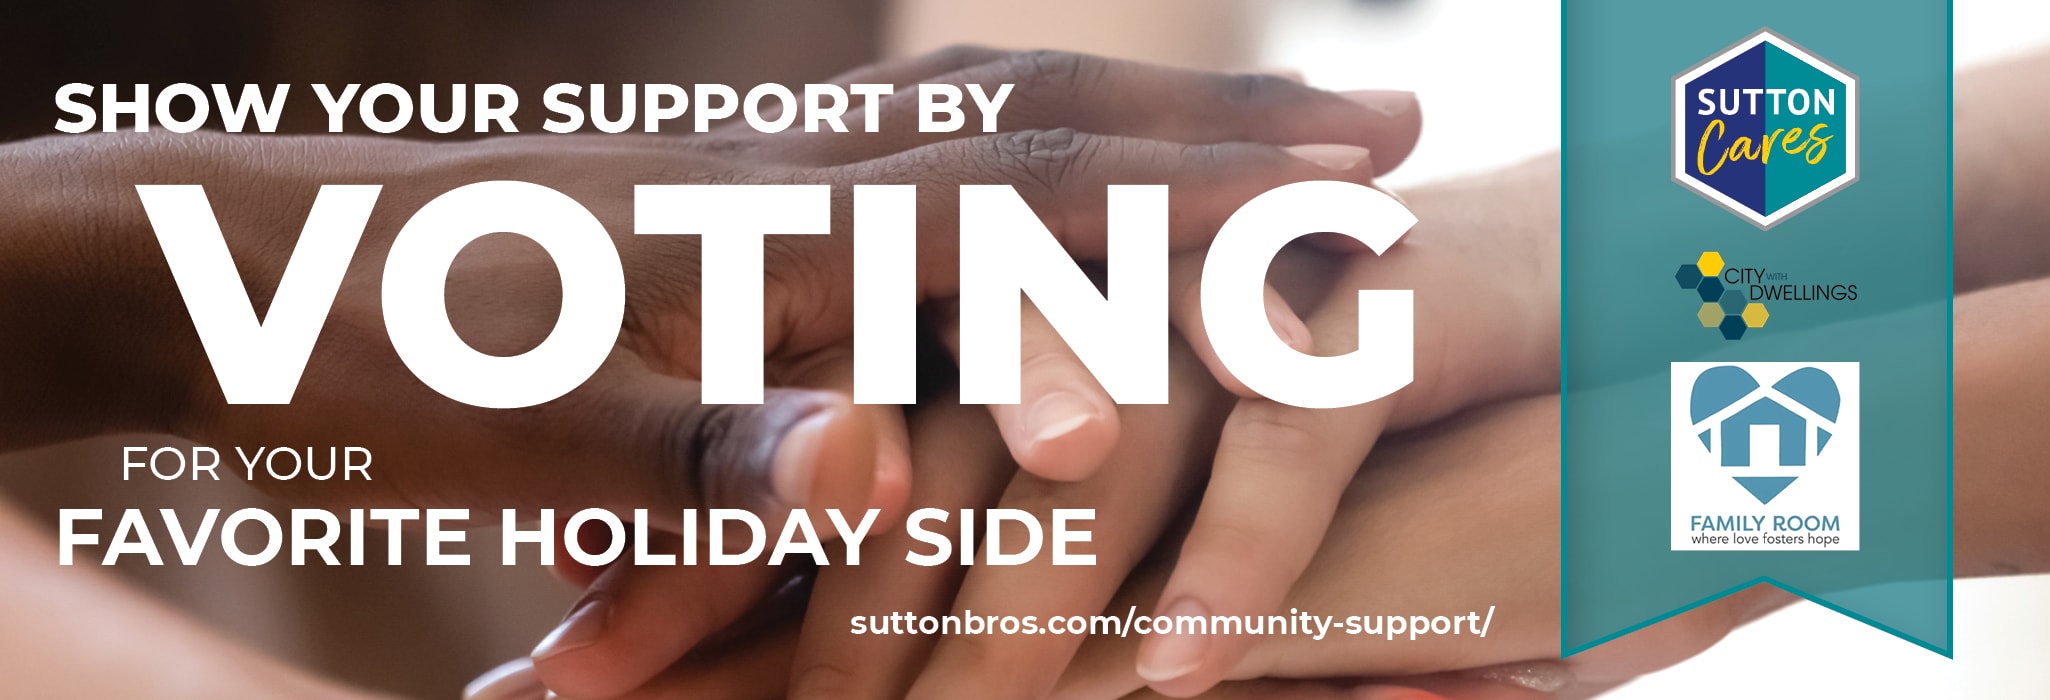 Show your support by voting for your favorite holiday side to support City With Dwellings and Family Room.